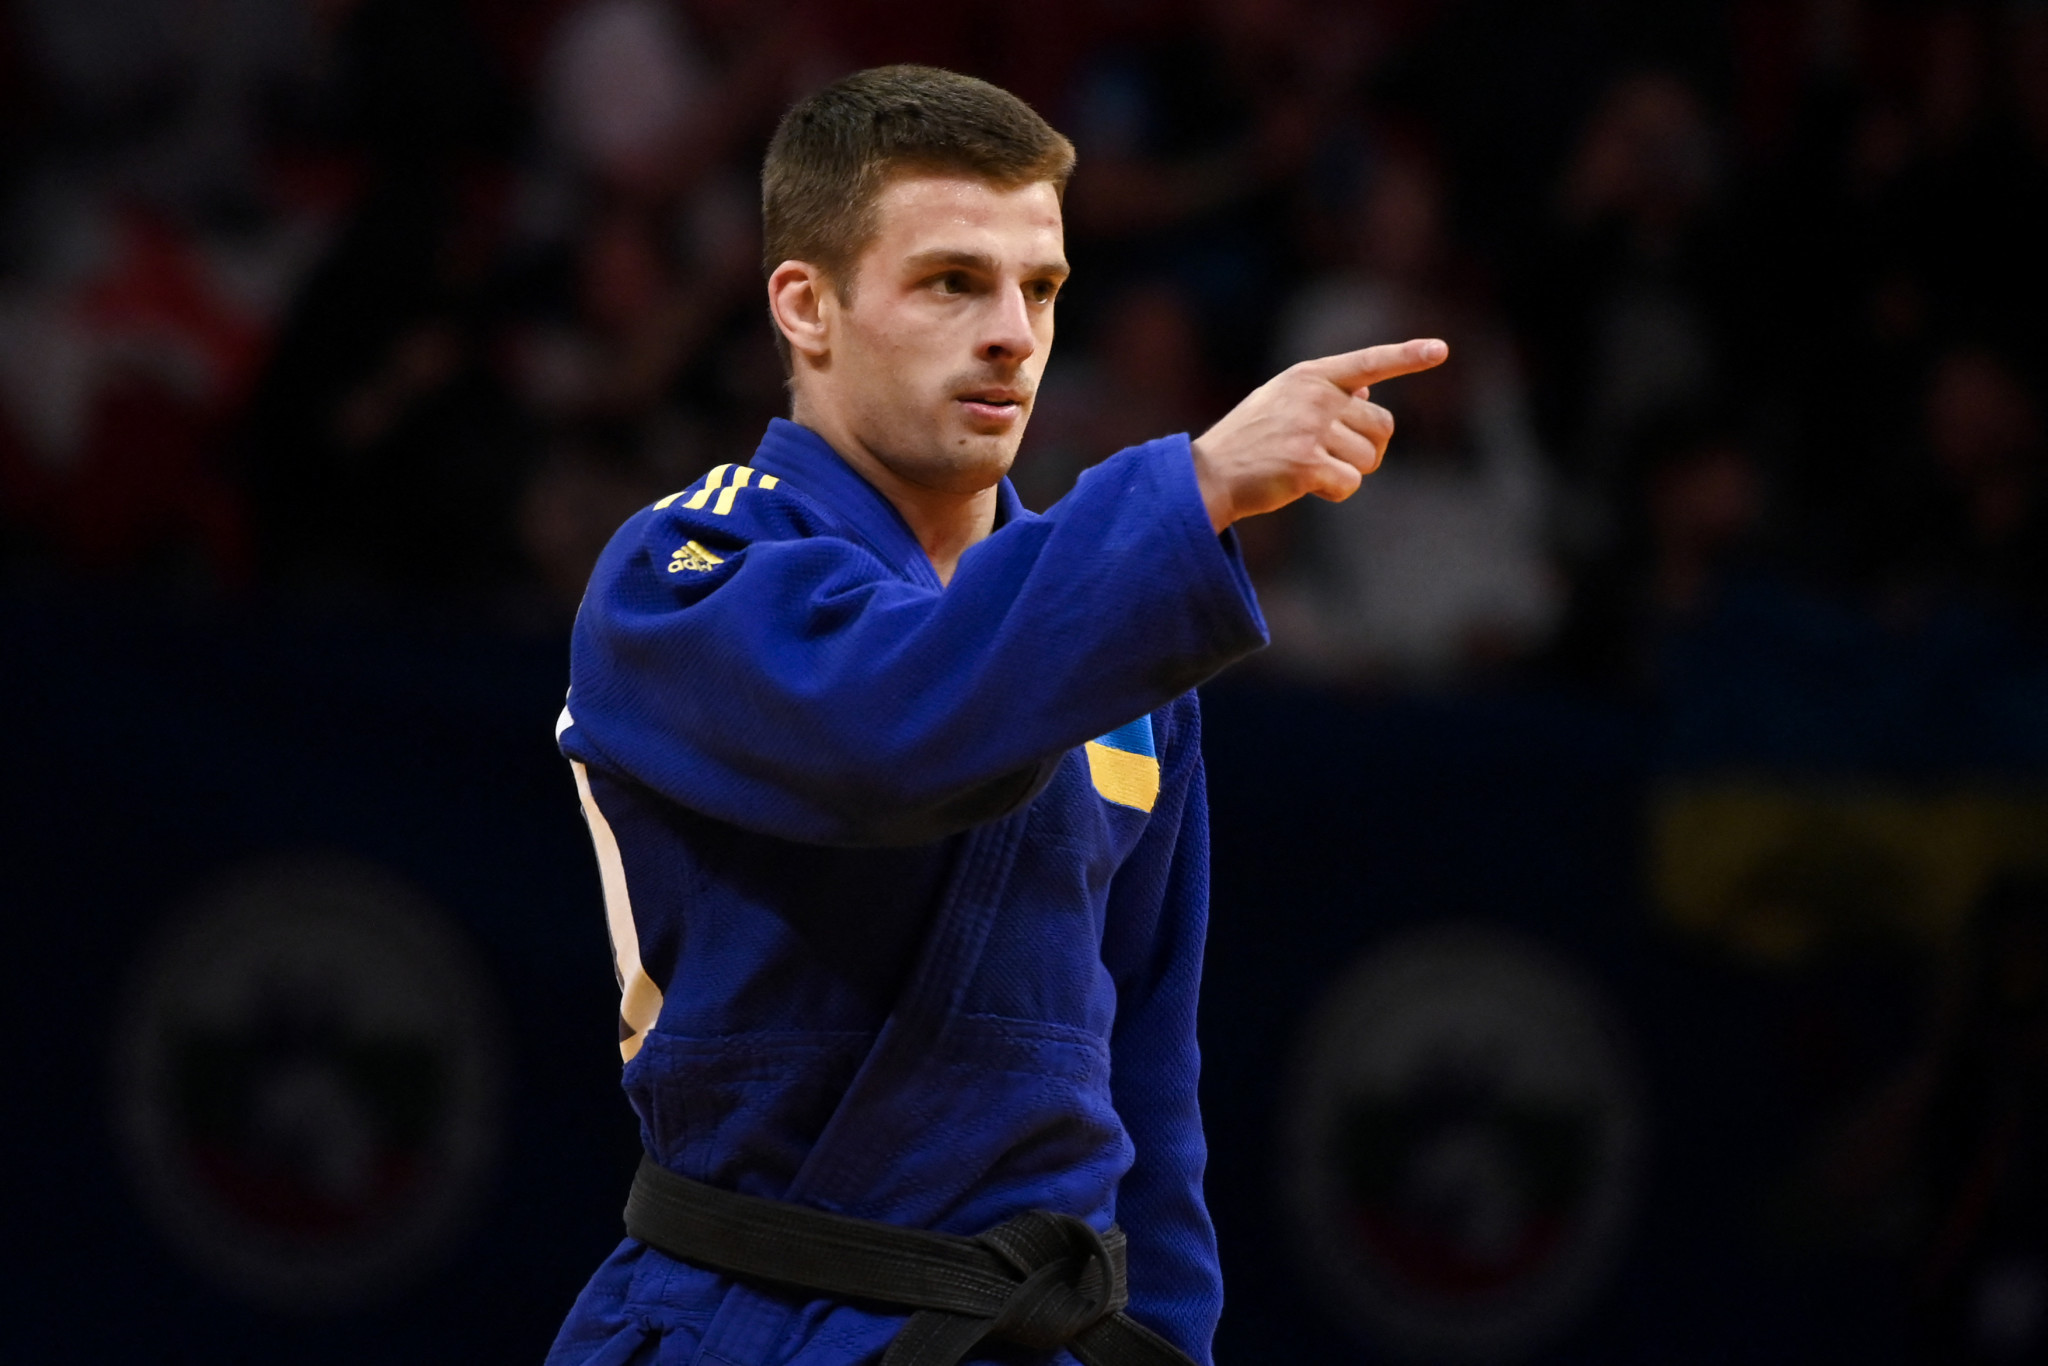 Ukraine refuse to participate alongside Russian and Belarusian neutrals at IJF events